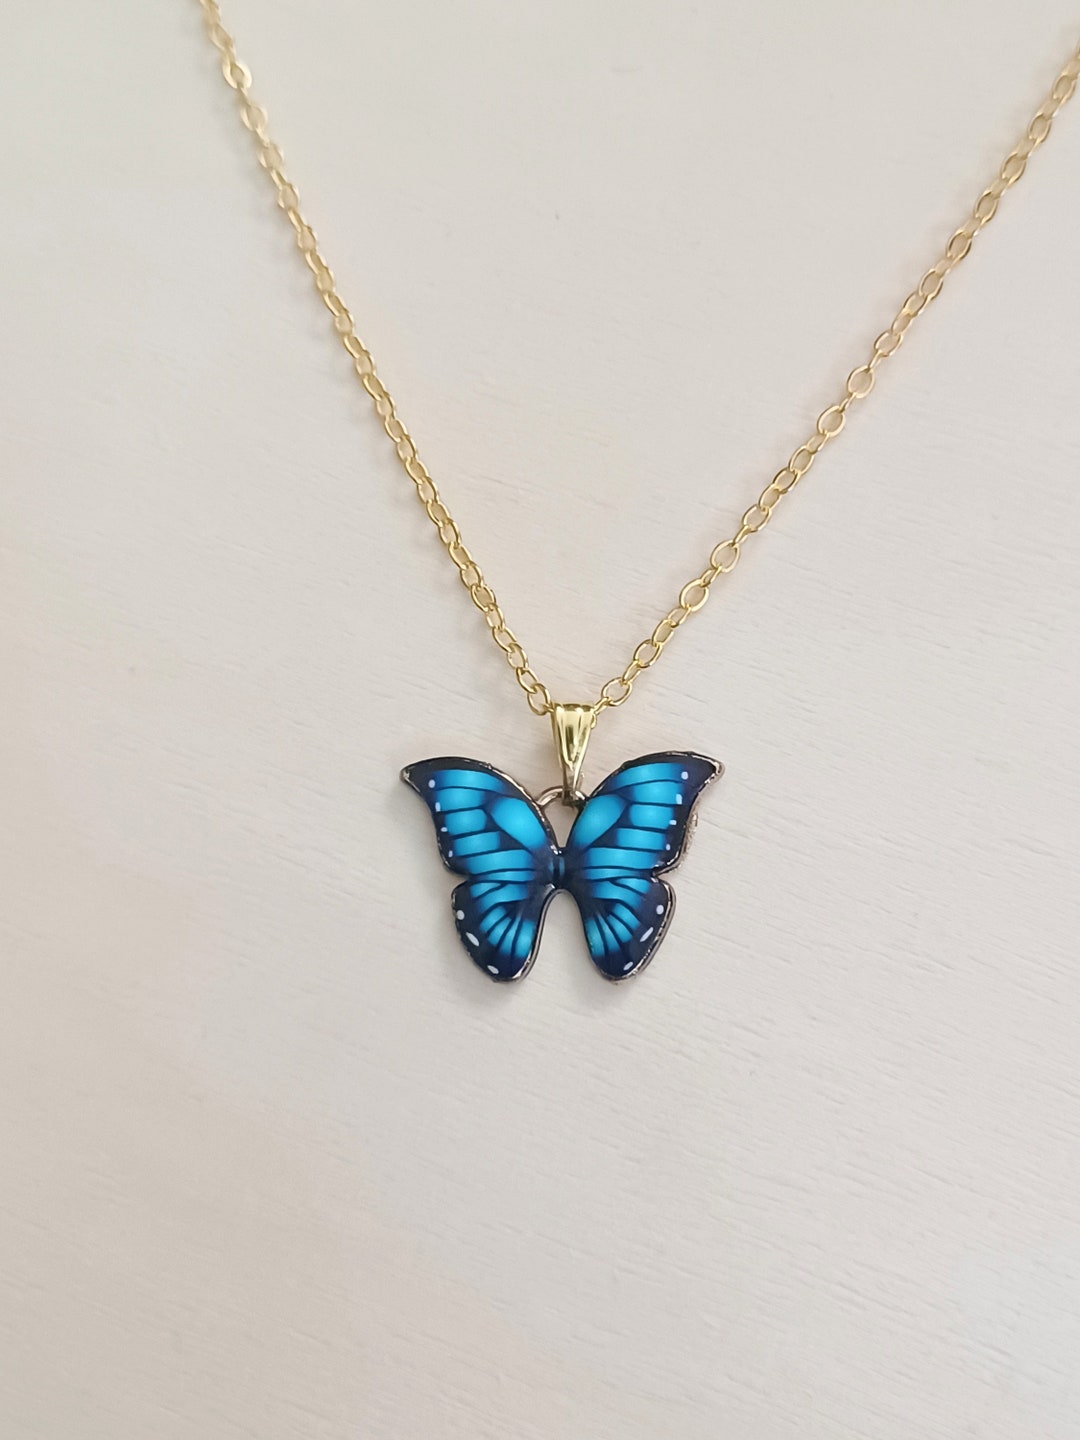 Blue Butterfly Necklace Matching Earrings Available - Etsy